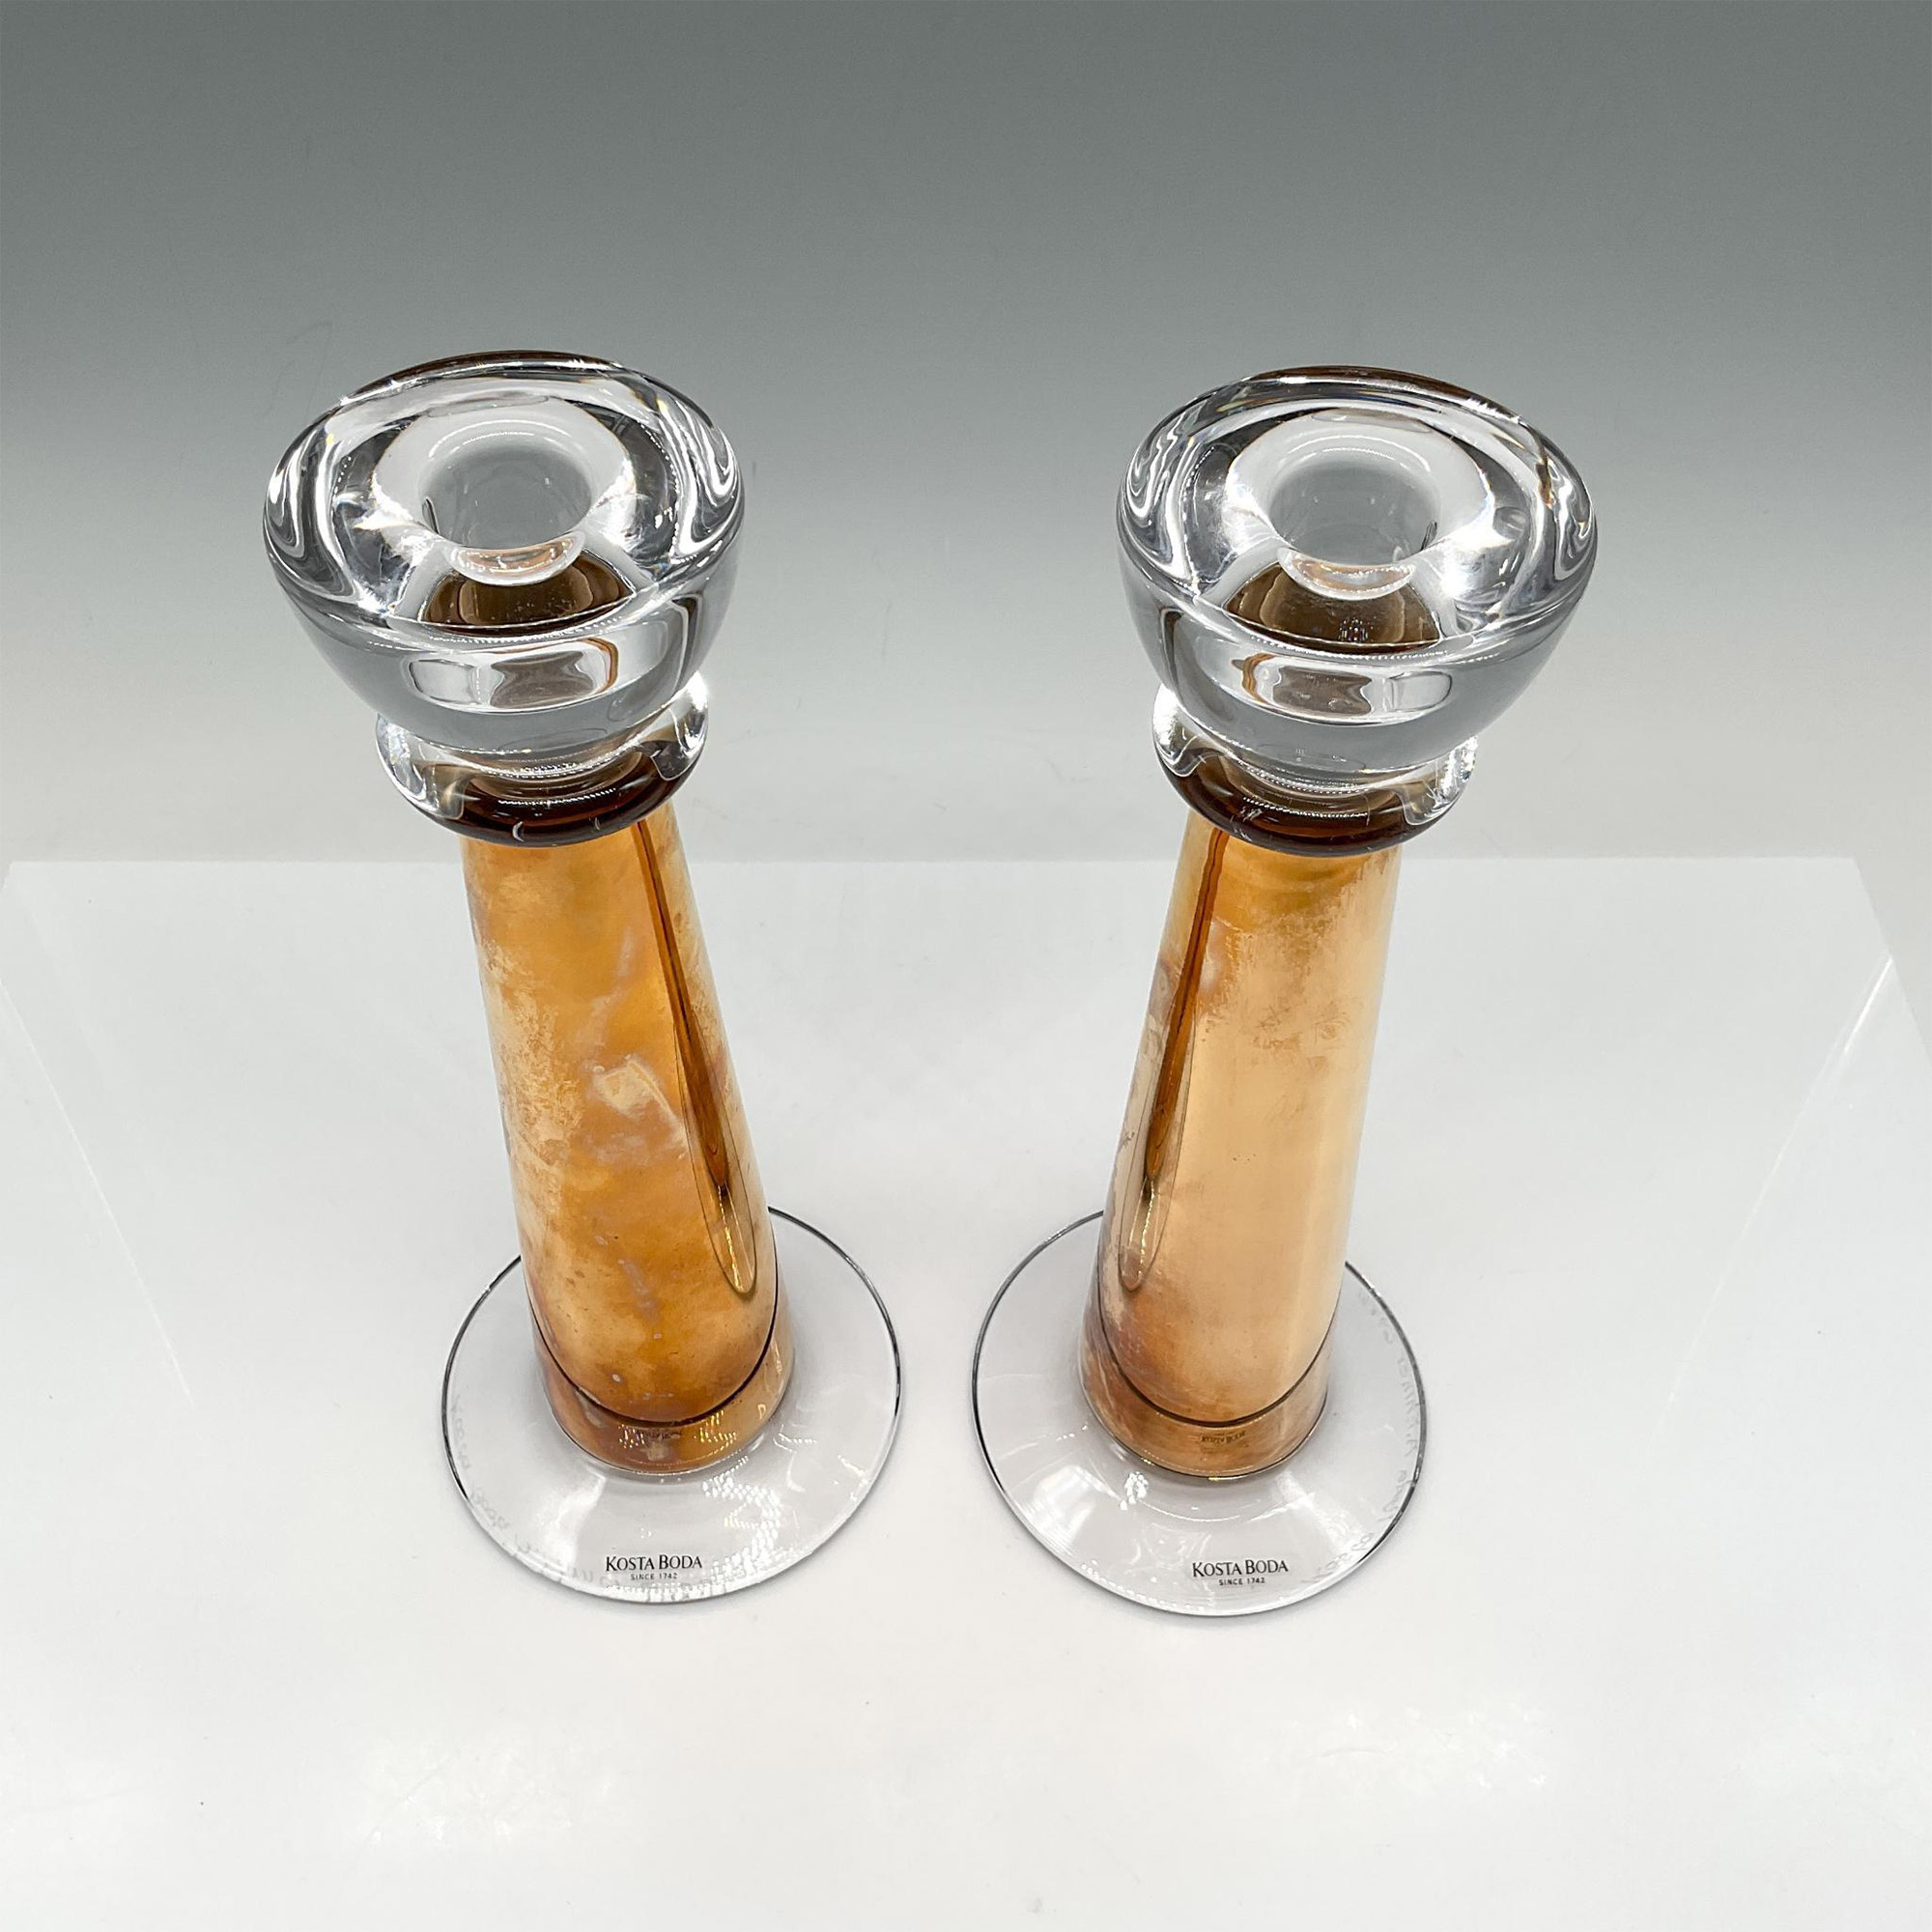 Pair of Kosta Boda Pillar Candle Holders, Signed - Image 2 of 3